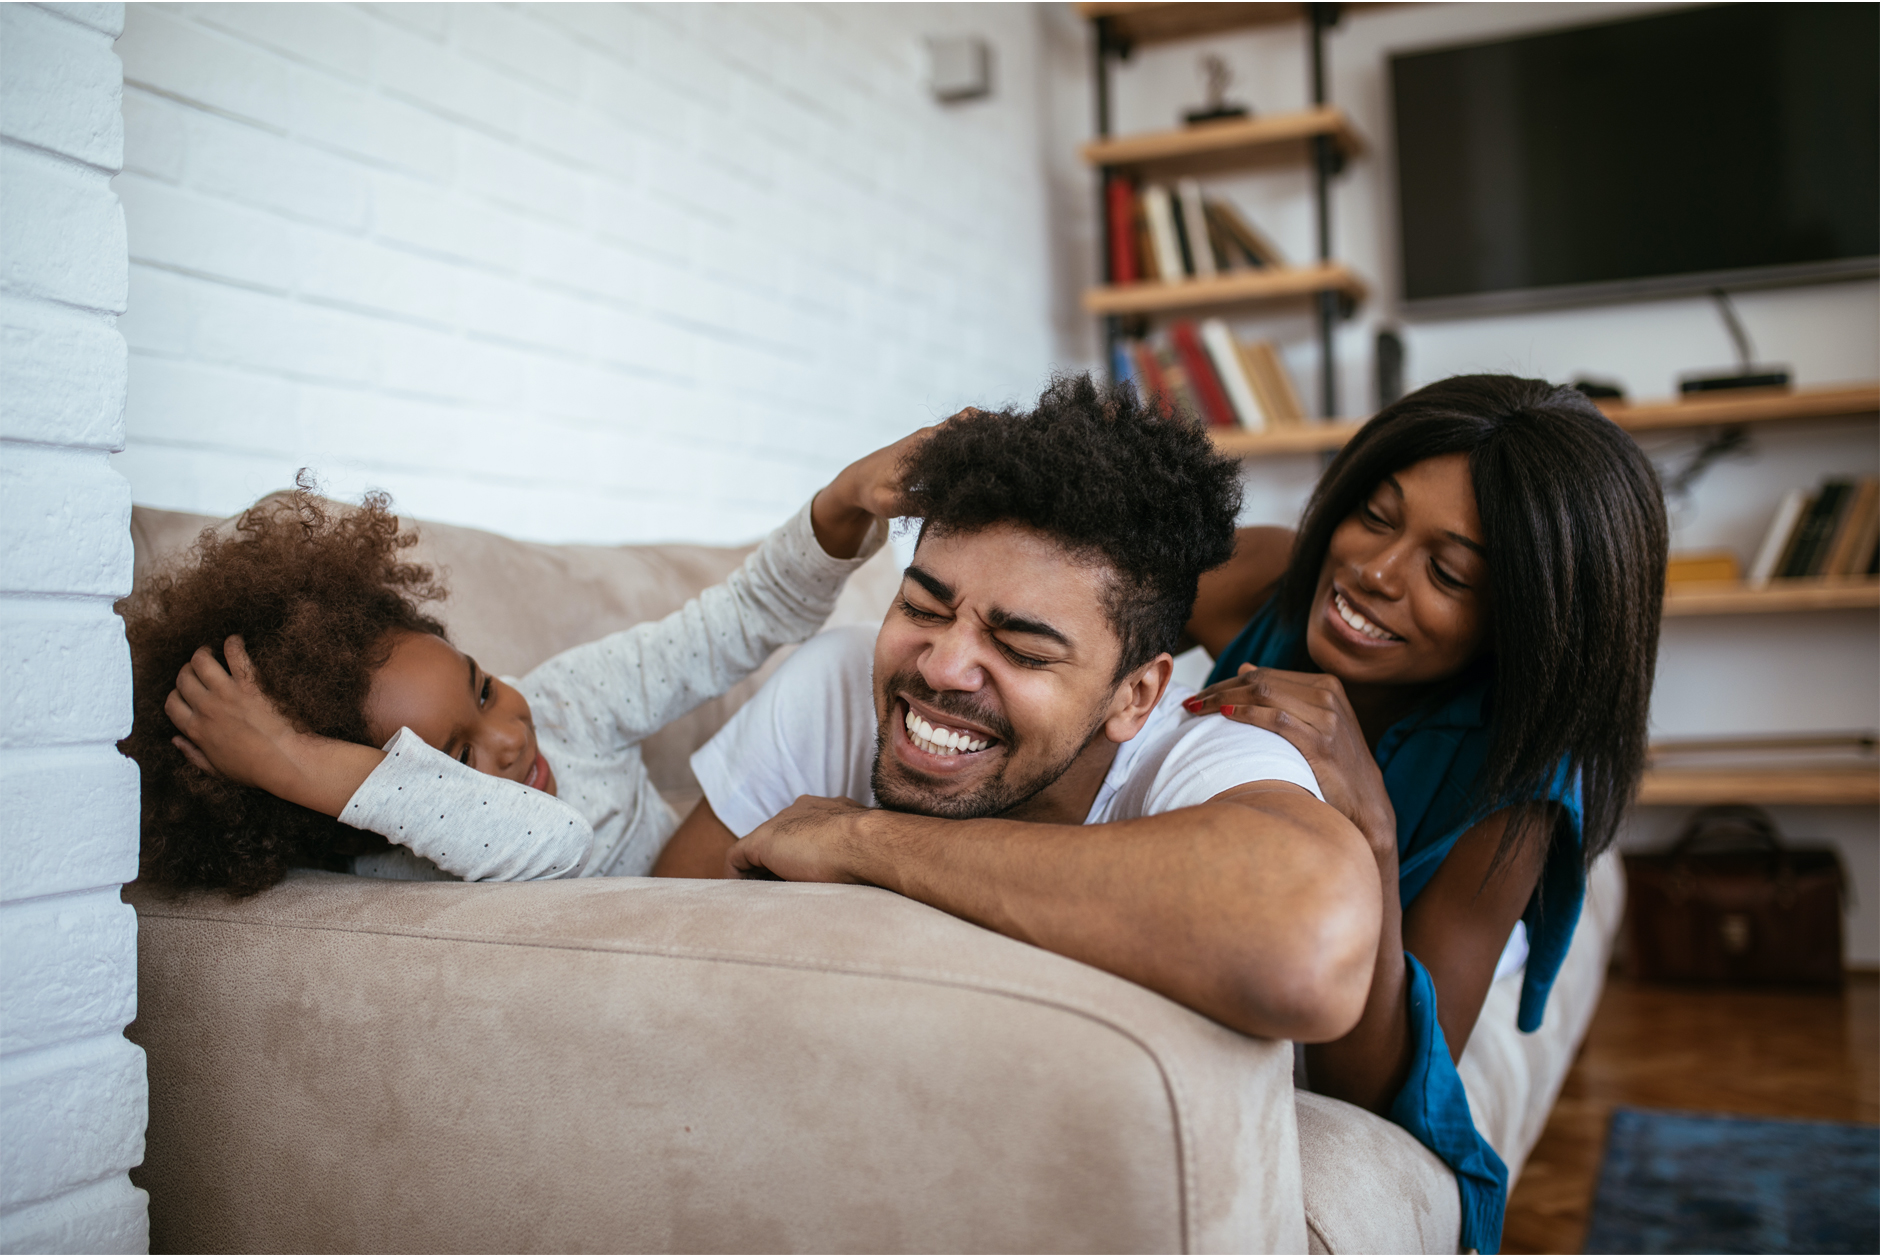 5 Things to Look for in a Family Home